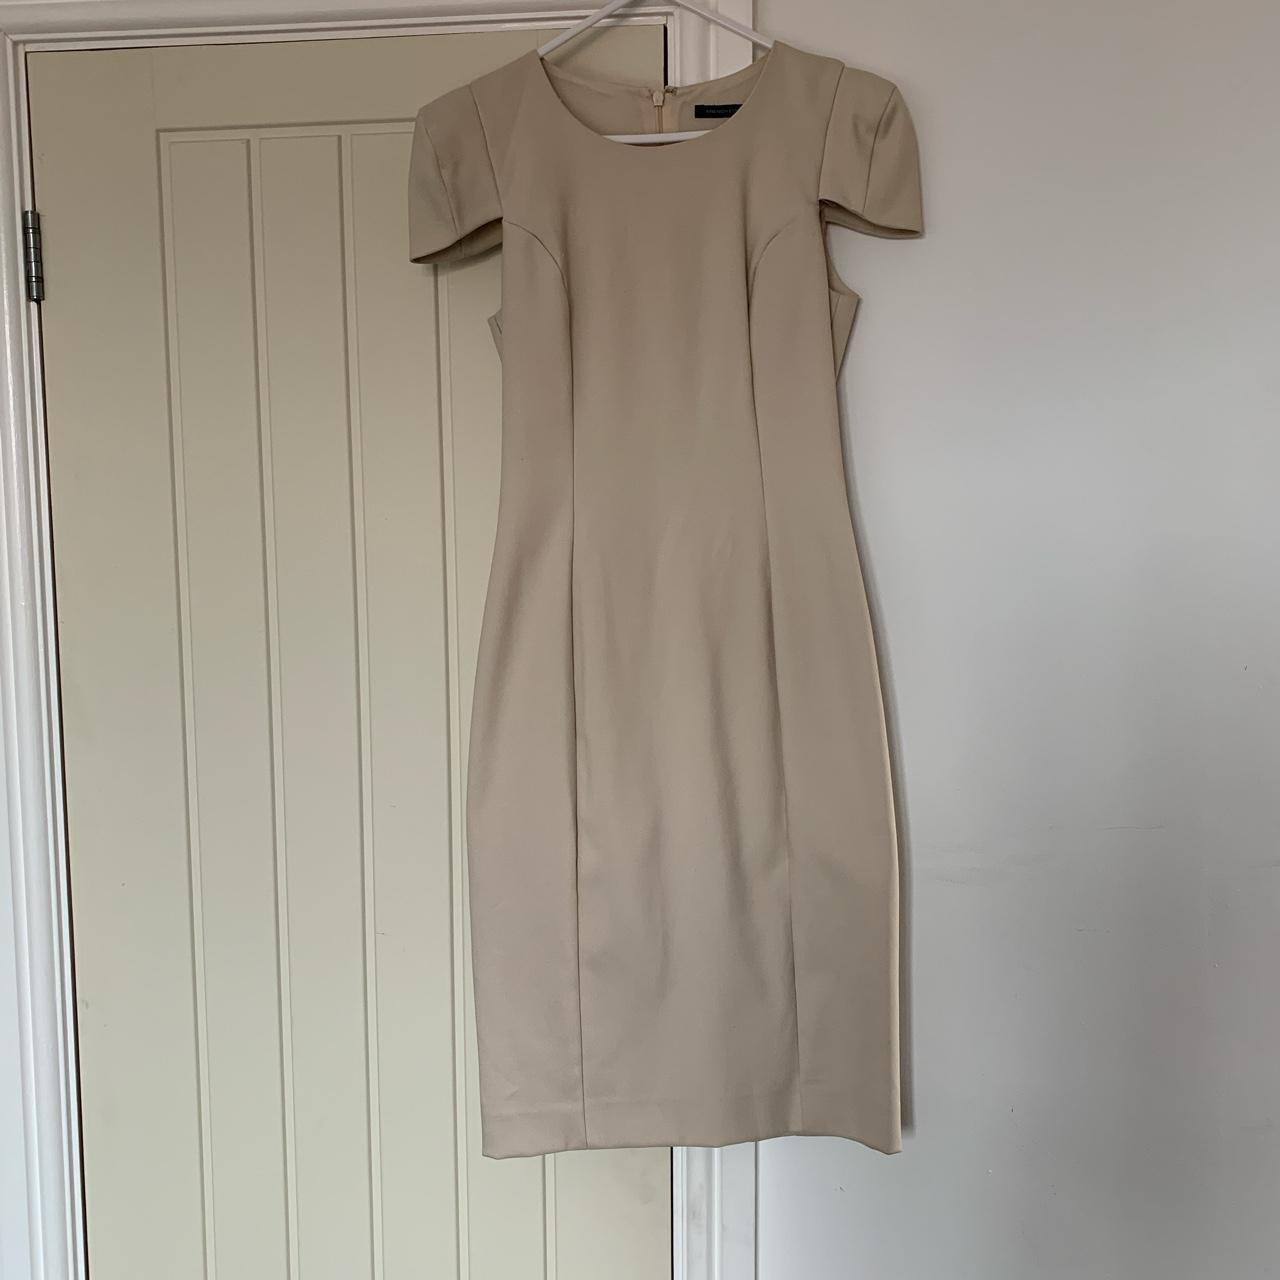 French connection nude dress #nude... - Depop